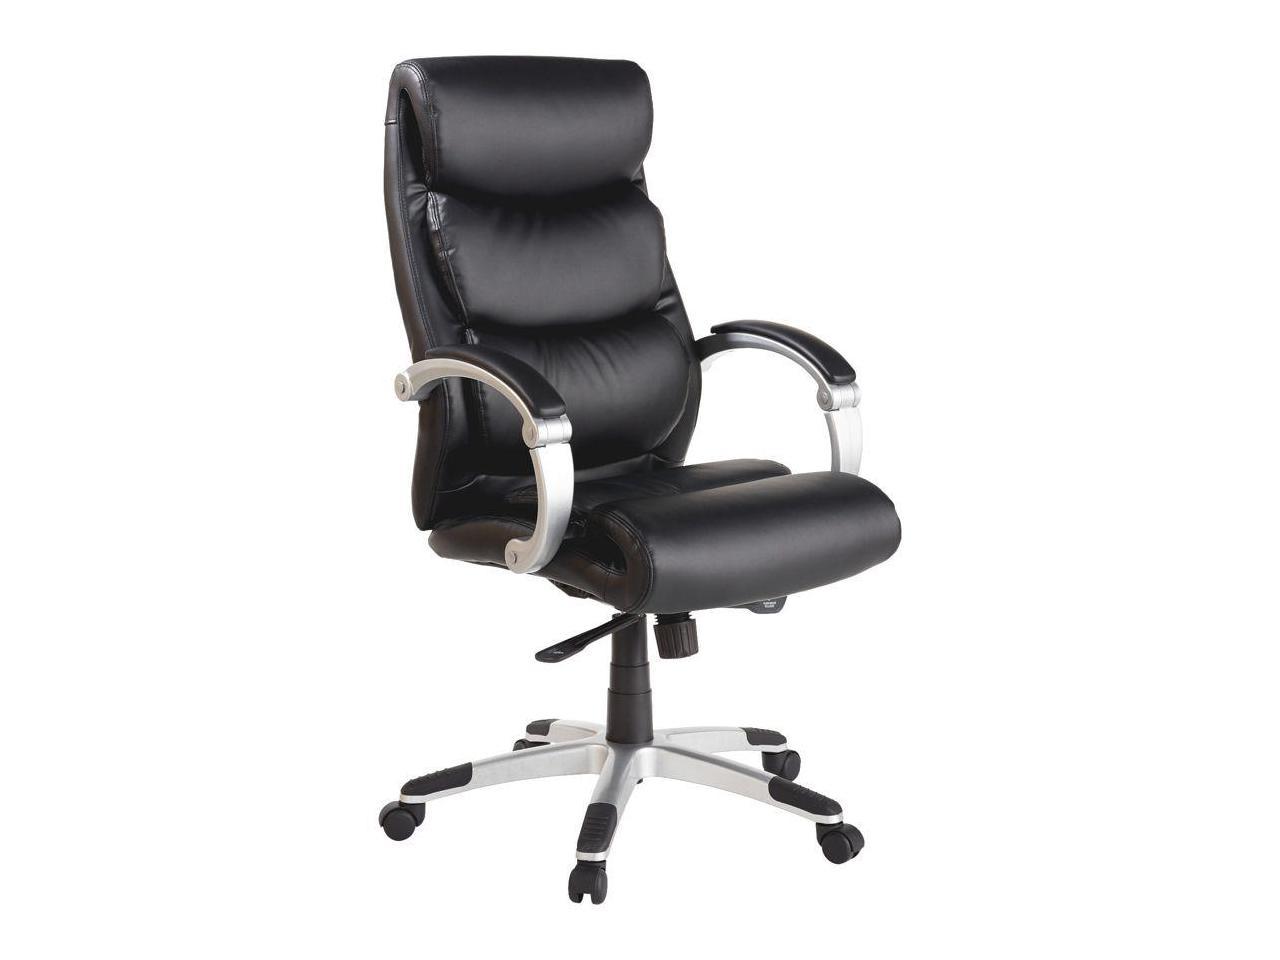 Lorell Exec High-Back Chair Leather Flex Arms 27"x30"x46-1/2" BK 60620 - image 4 of 19